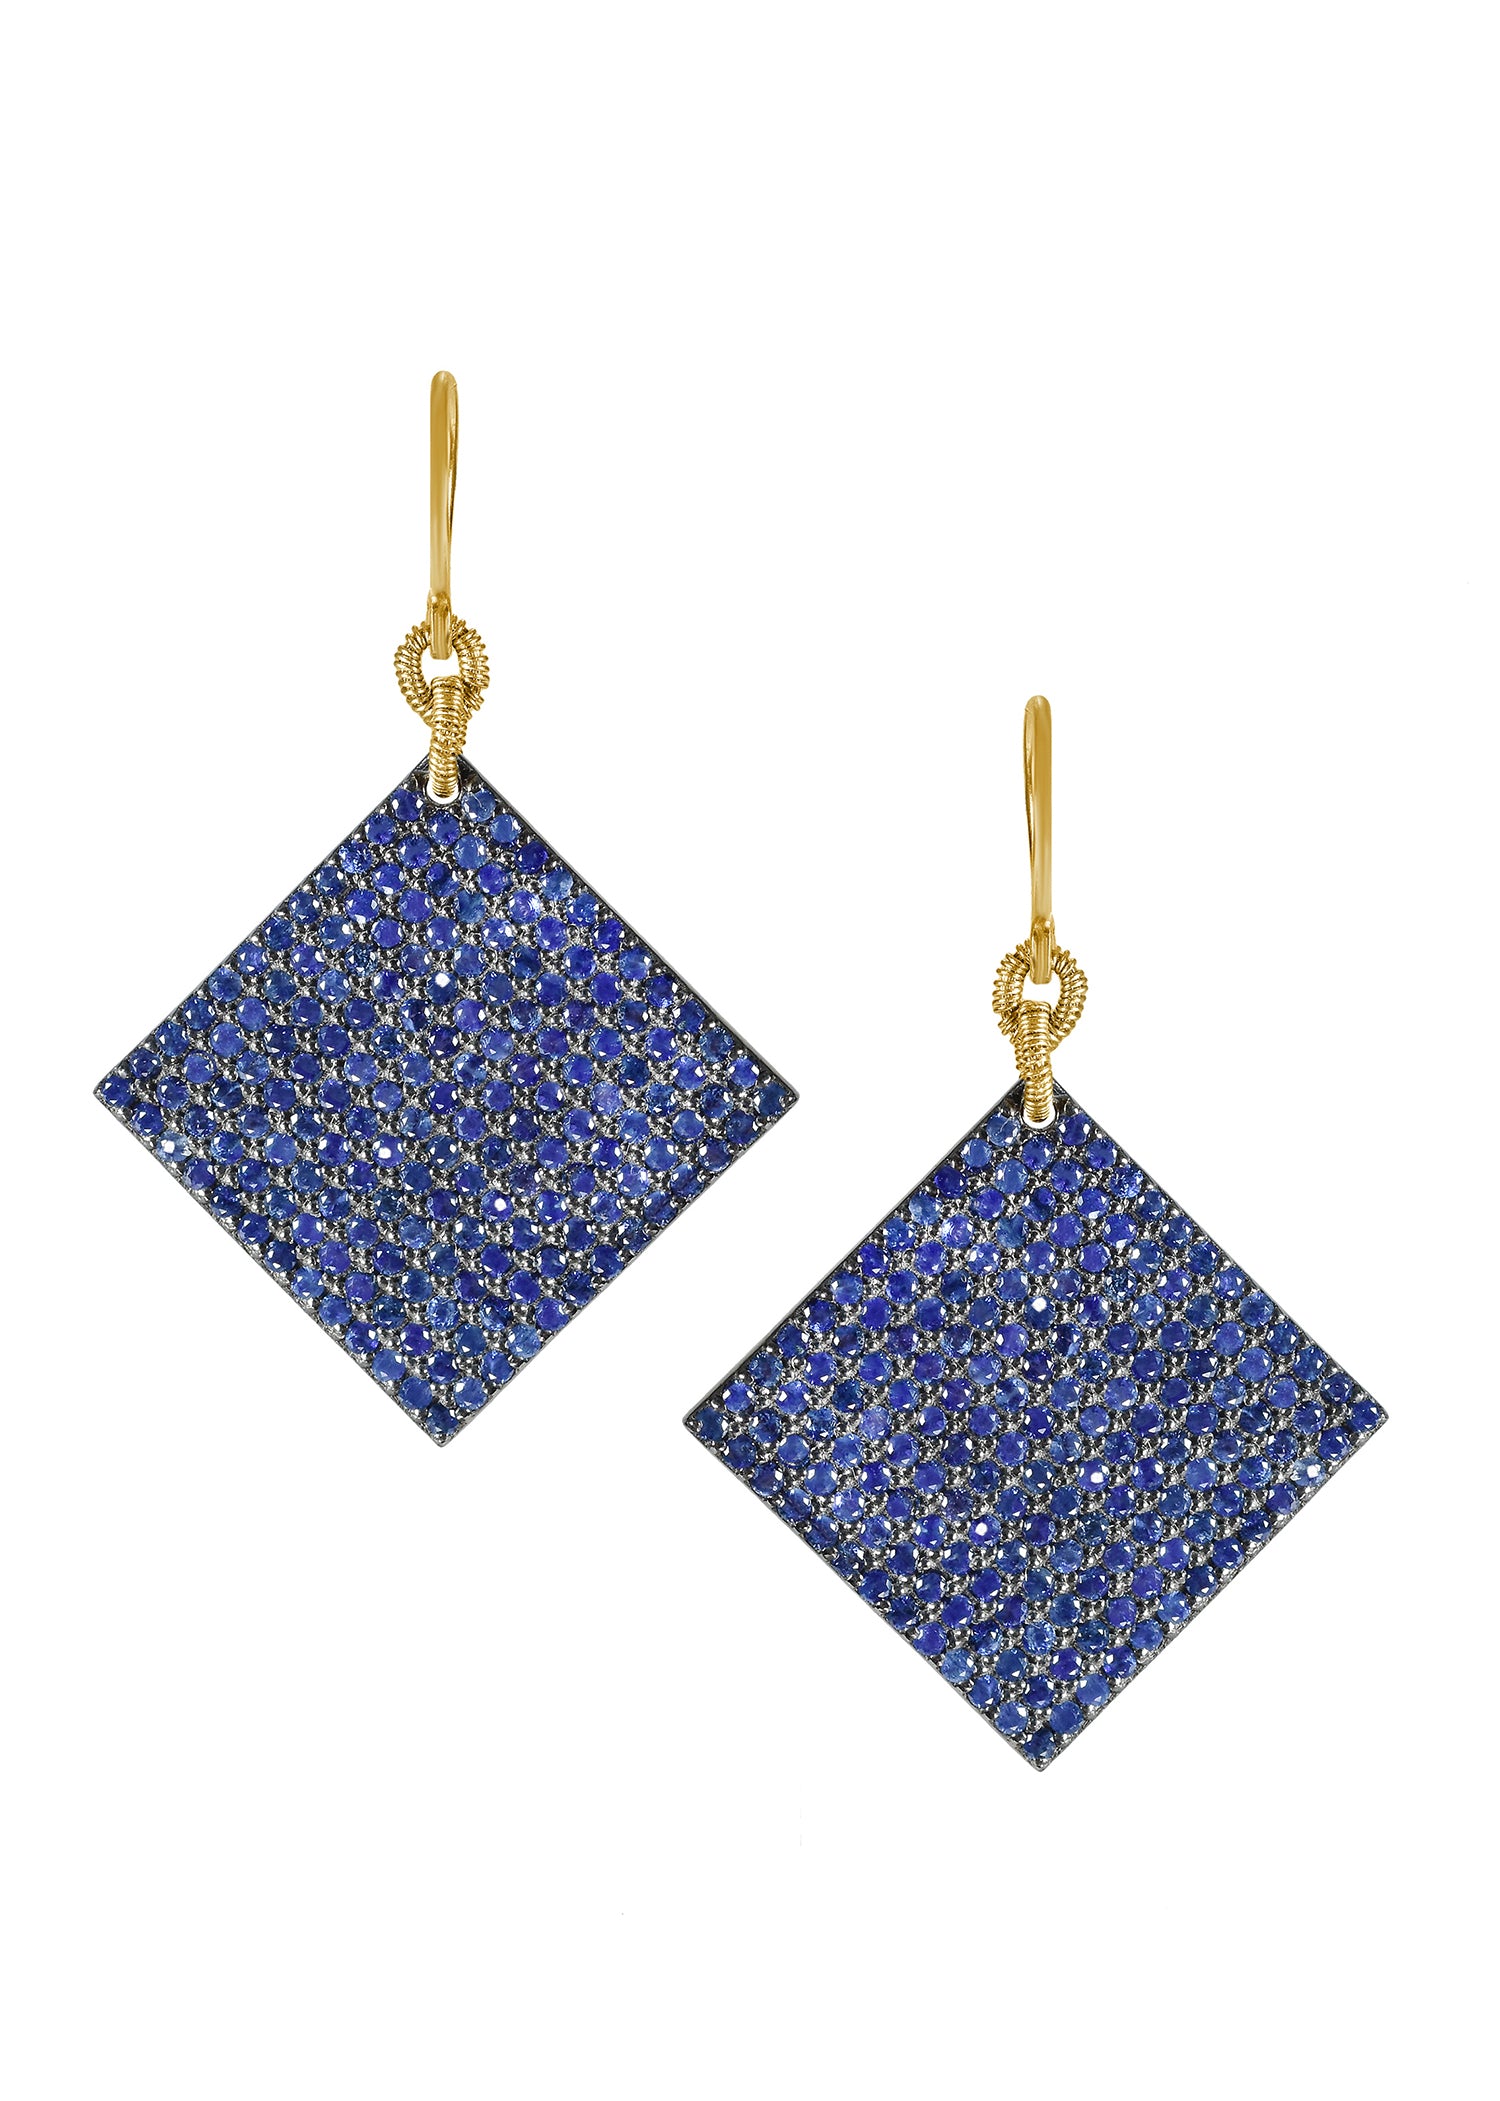 Blue sapphire 14k gold Sterling silver Mixed metal Special order only Earrings measure 1-1/2" in length (including the ear wires) and 1 1/8" in width Handmade in our Los Angeles studio